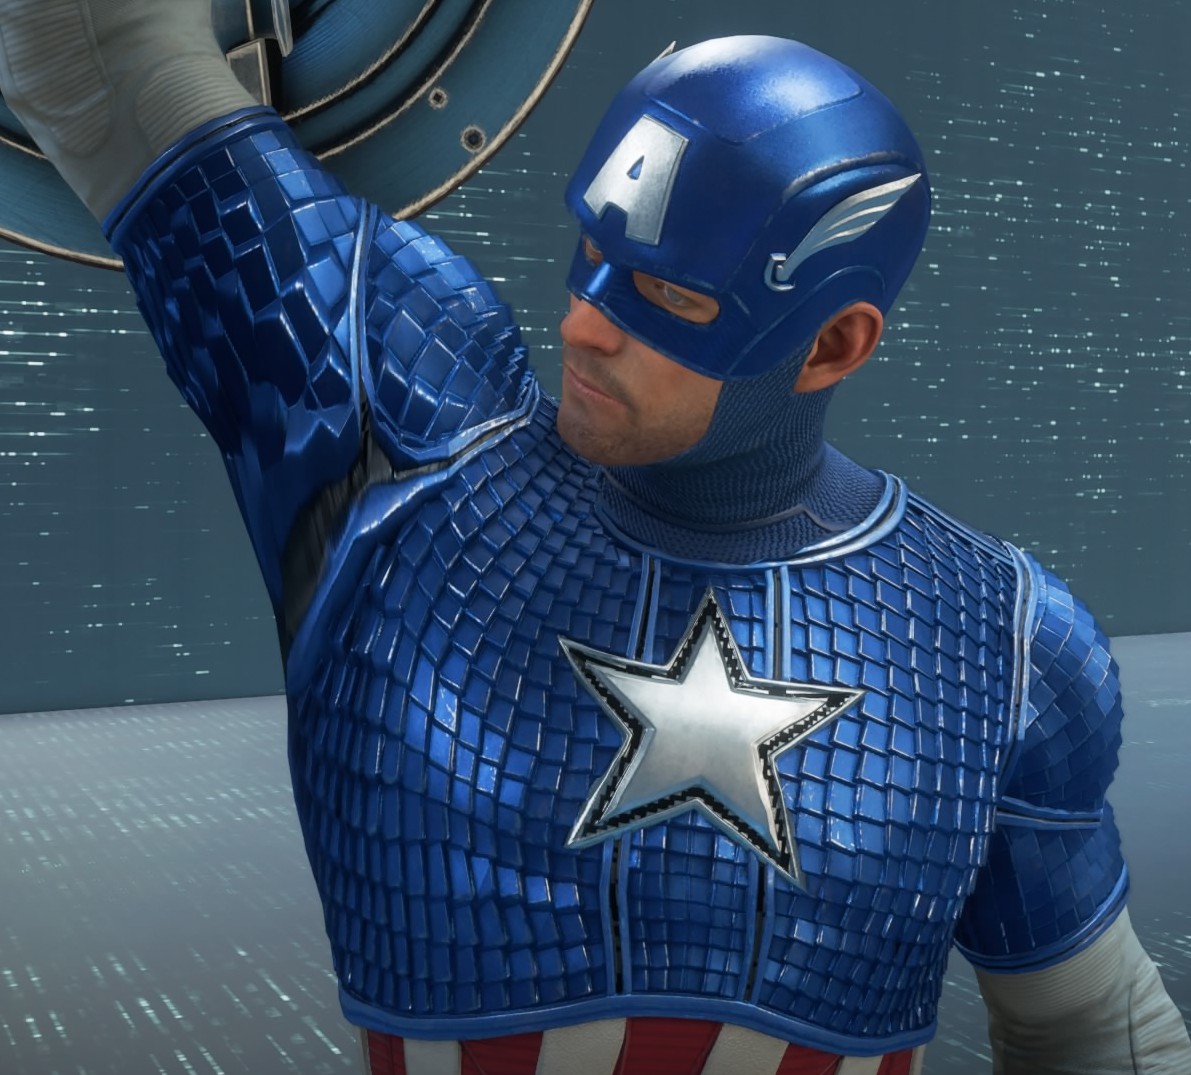 Classic cap, close ups and poses, he looks fantastic in game. really love this skin